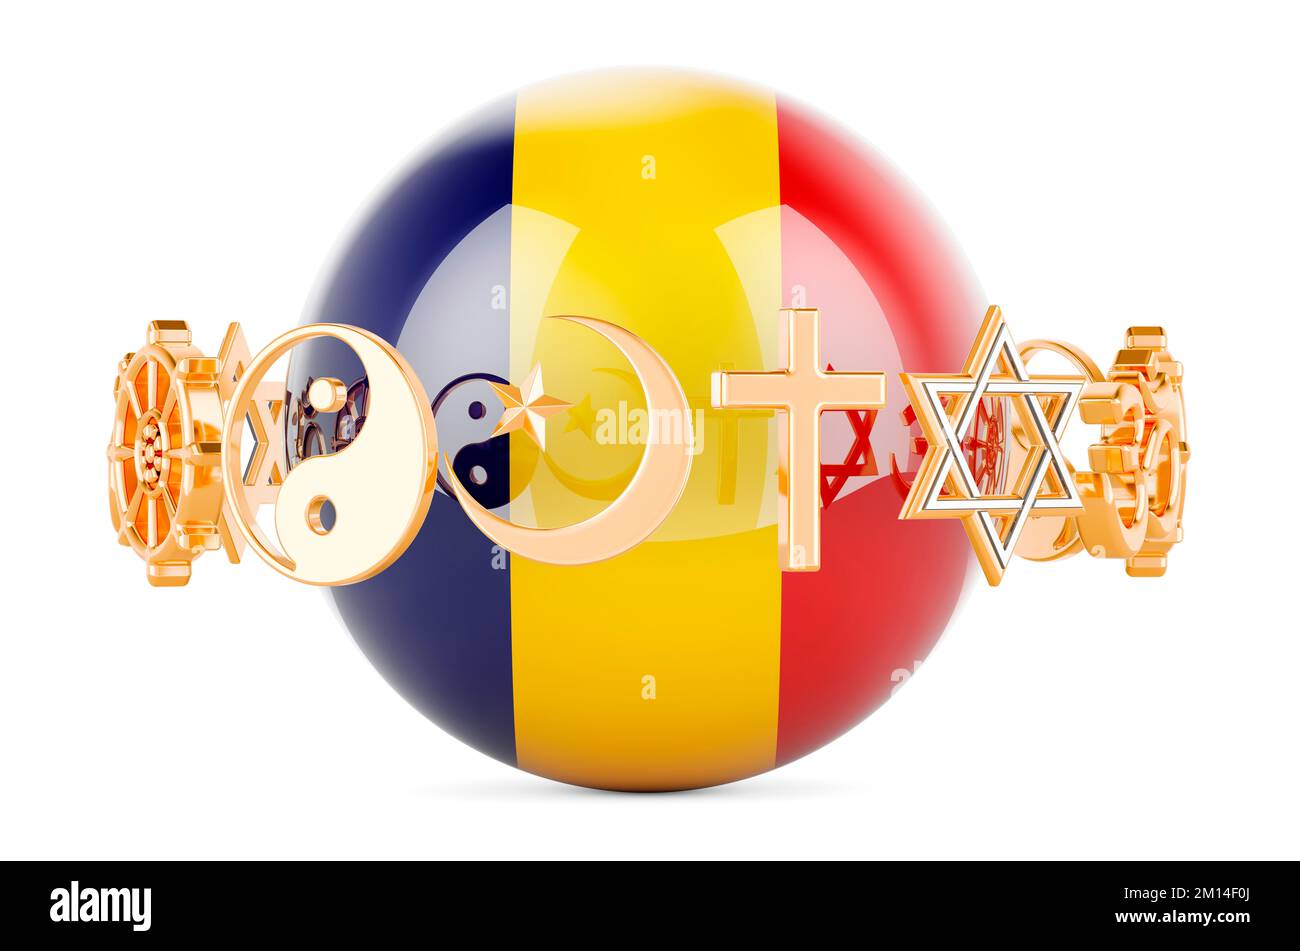 Romanian flag painted on sphere with religions symbols around, 3D rendering isolated on white background Stock Photo